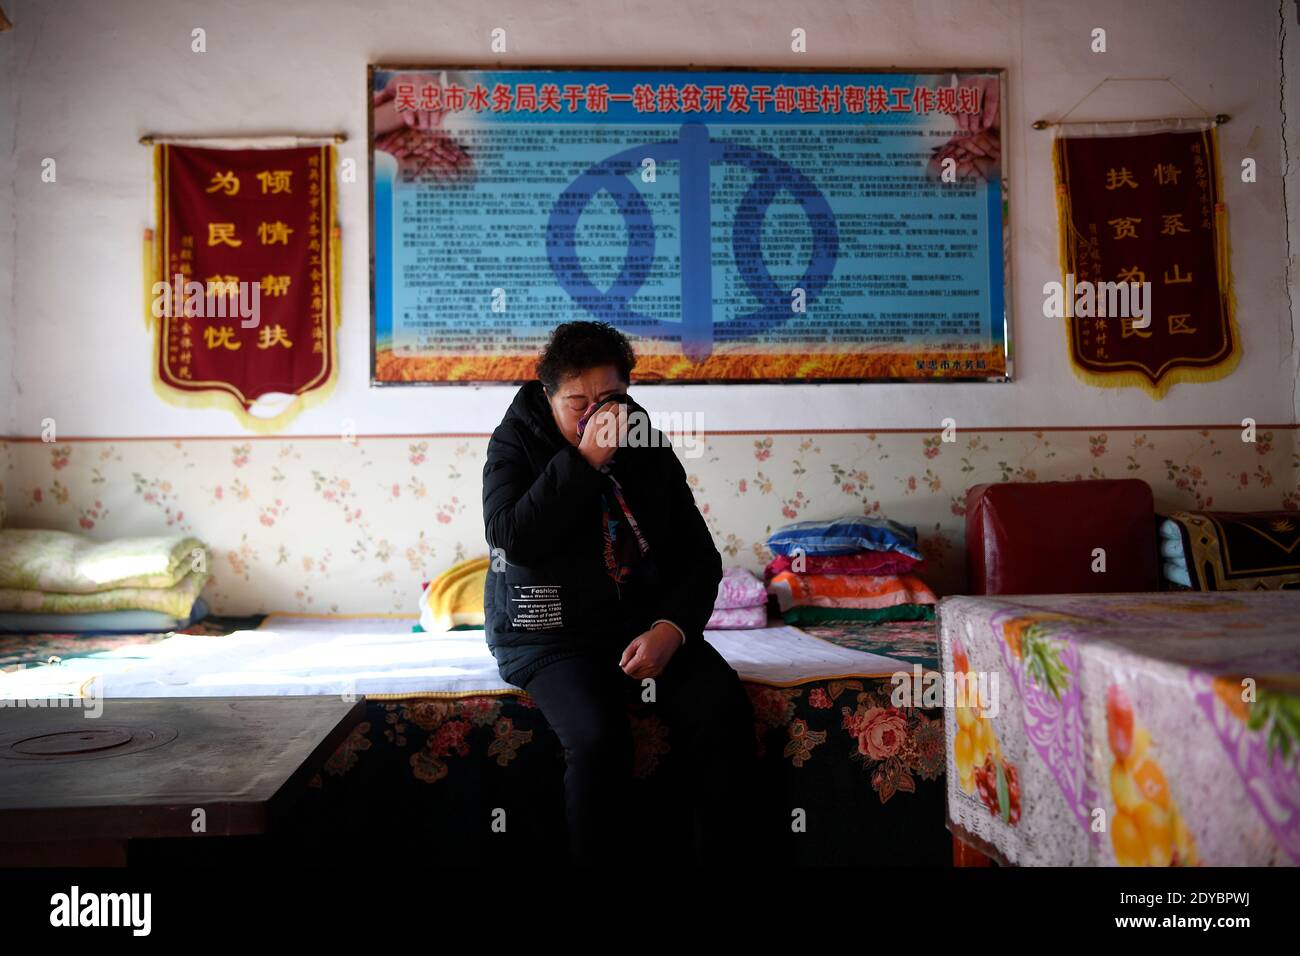 (201225) -- YINCHUAN, Dec. 25, 2020 (Xinhua) -- Ding Haiyan has an emotional moment while recalling the difficult times she had over the six years since she transferred to Hejiayuan Village of Xihaigu in northwest China's Ningxia Hui Autonomous Region, Oct. 28, 2020. Xihaigu, a largely mountainous region in northwest Ningxia, was once inflicted by deep poverty and labeled the 'most unfit place for human settlement' by the United Nations in the 1970s due to land reclamation, drought, and a fragile ecological environment. On Nov. 16, 2020, Xihaigu historically bid farewell to absolute poverty, d Stock Photo